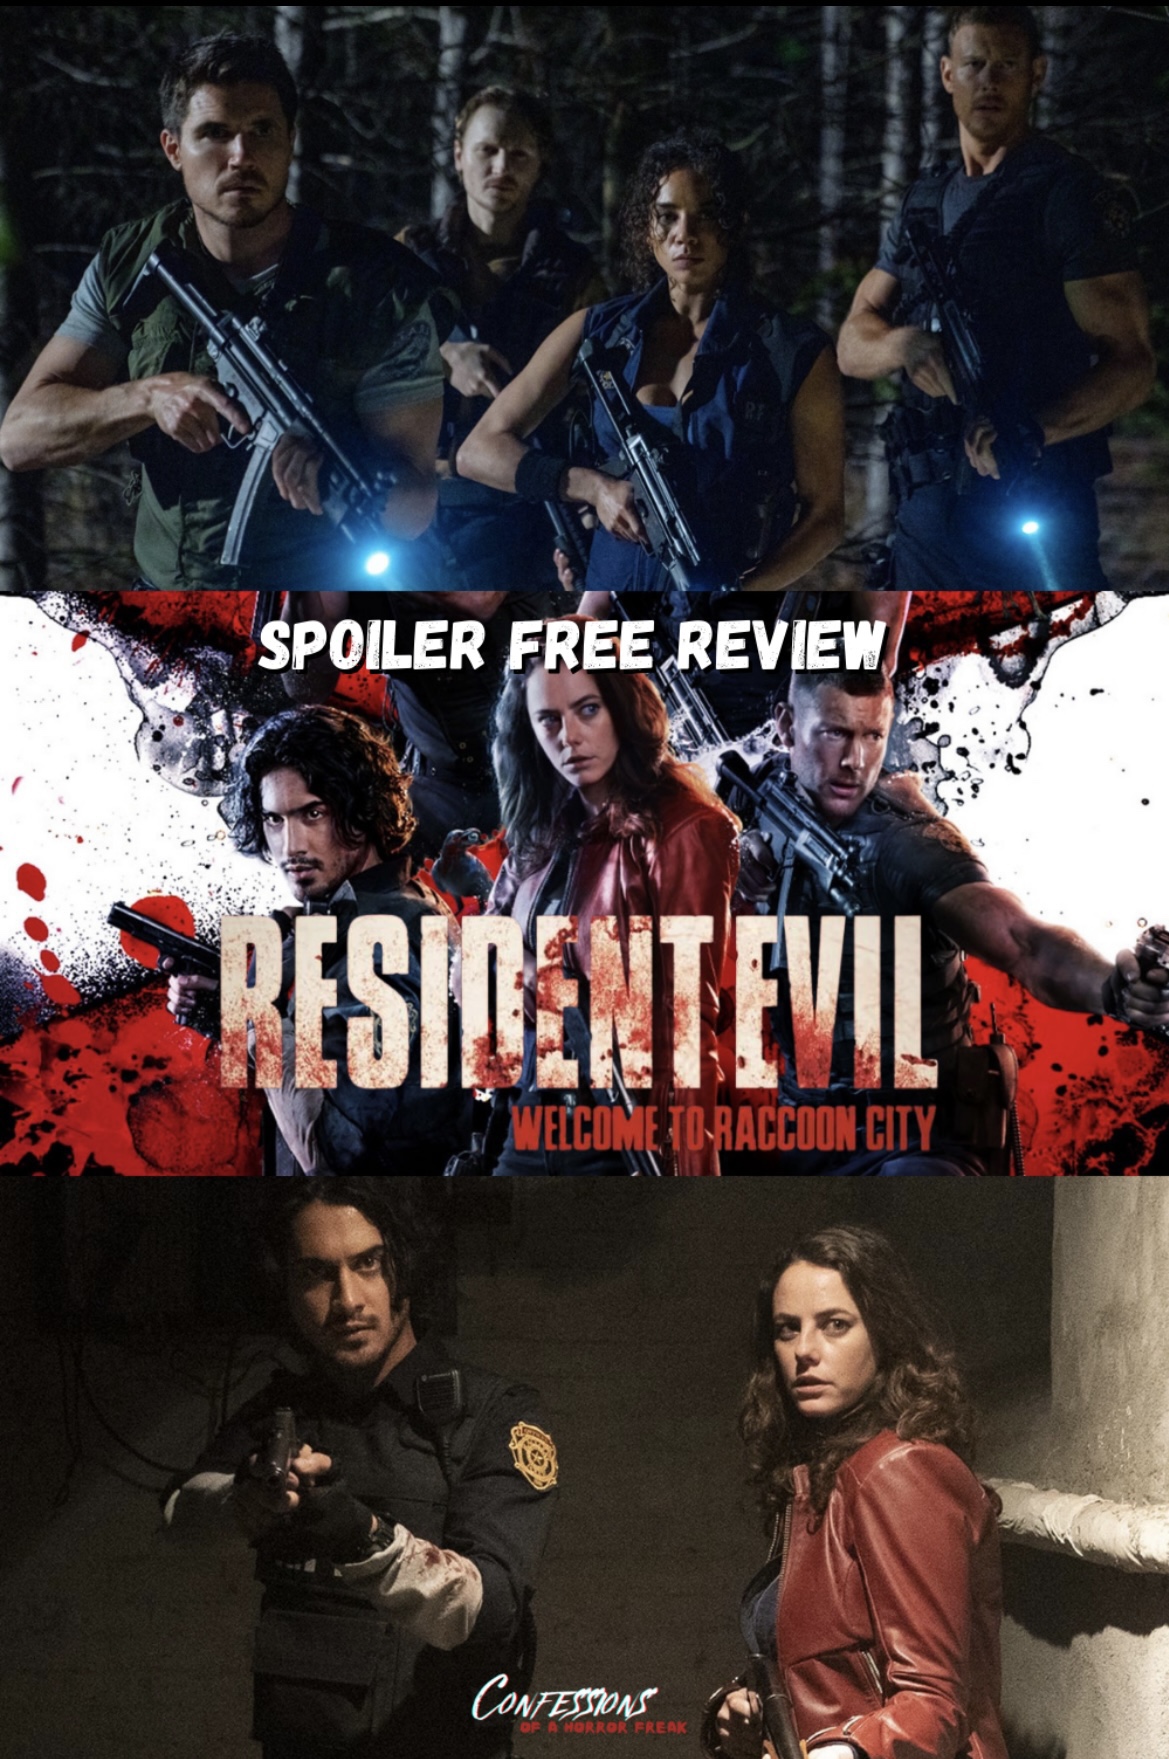 Resident Evil: Welcome To Raccoon City (2021) spoiler free review